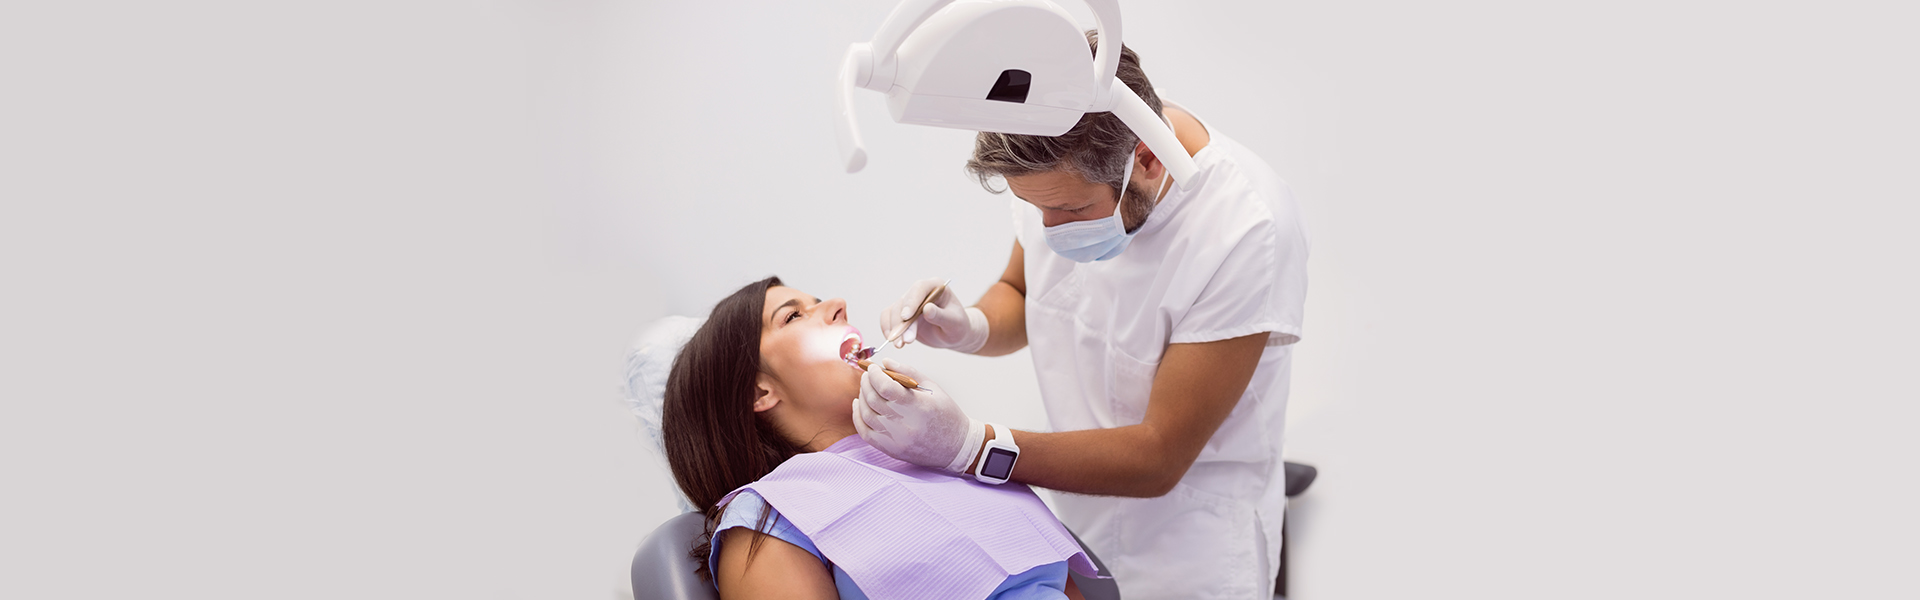 The Future of Dentistry: How Technology Is Changing the Way We Care for Our Teeth